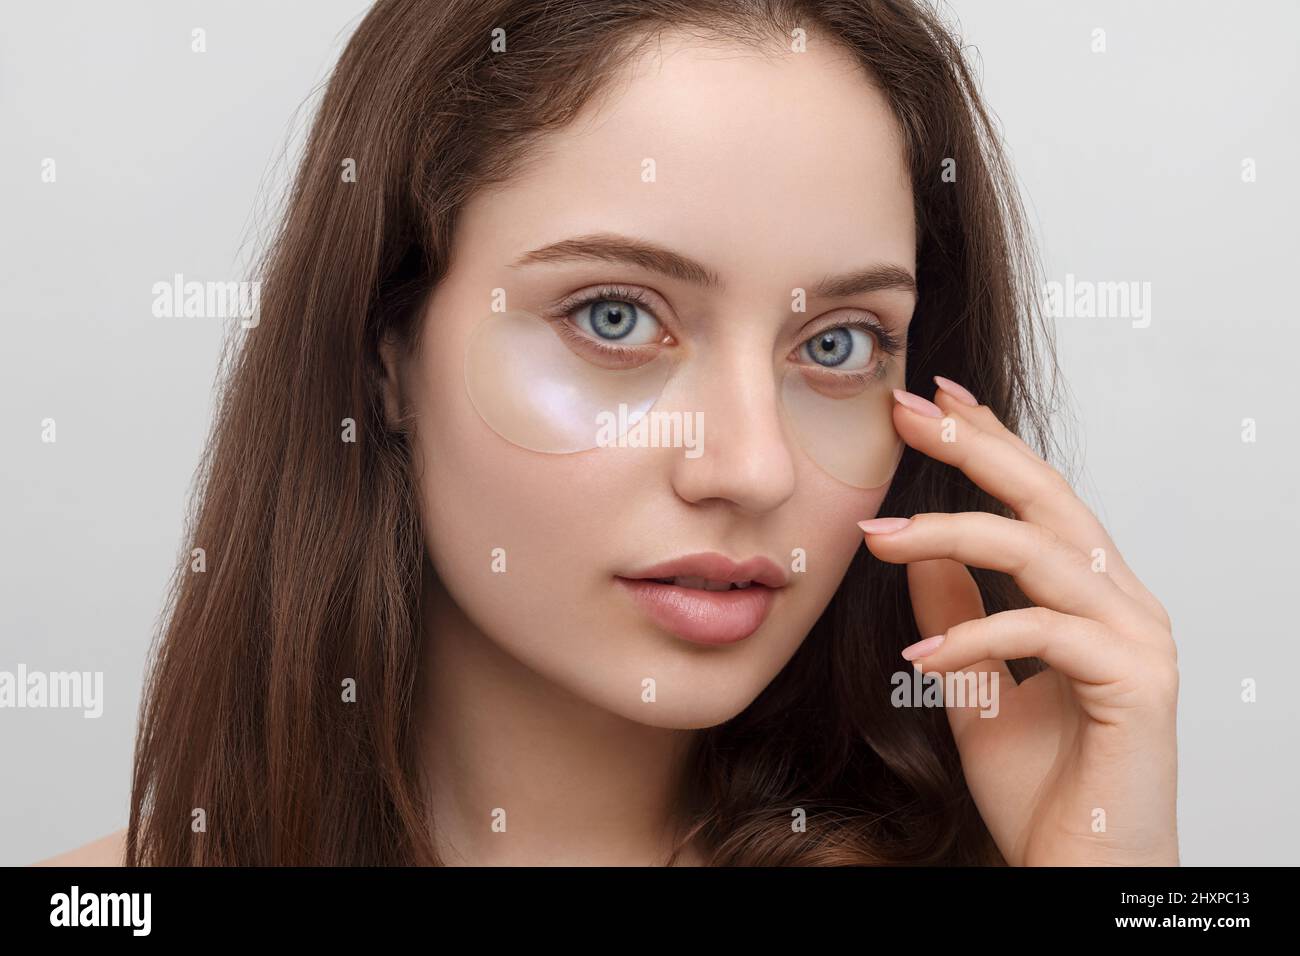 Young girl with eye patch, close up Stock Photo